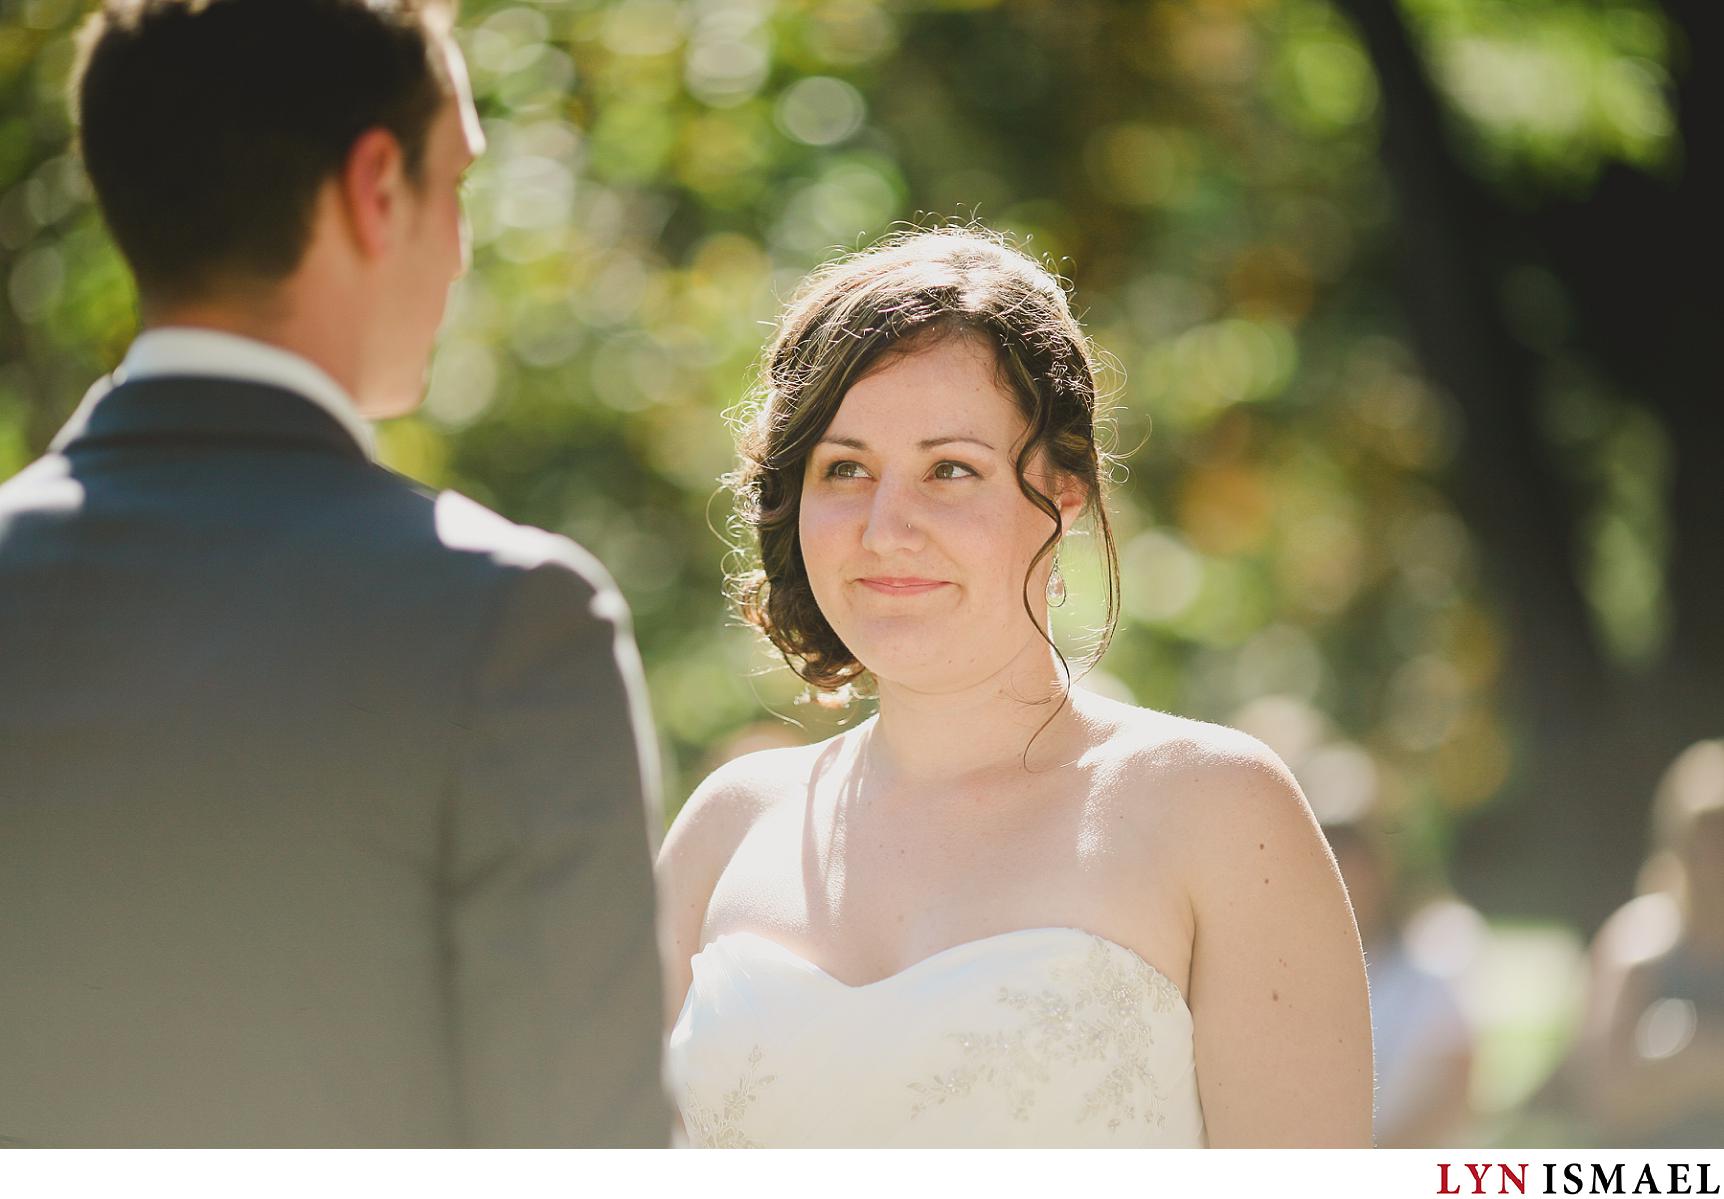 A bride looks at her groom as they exchanged vows at an outdoor wedding ceremony in